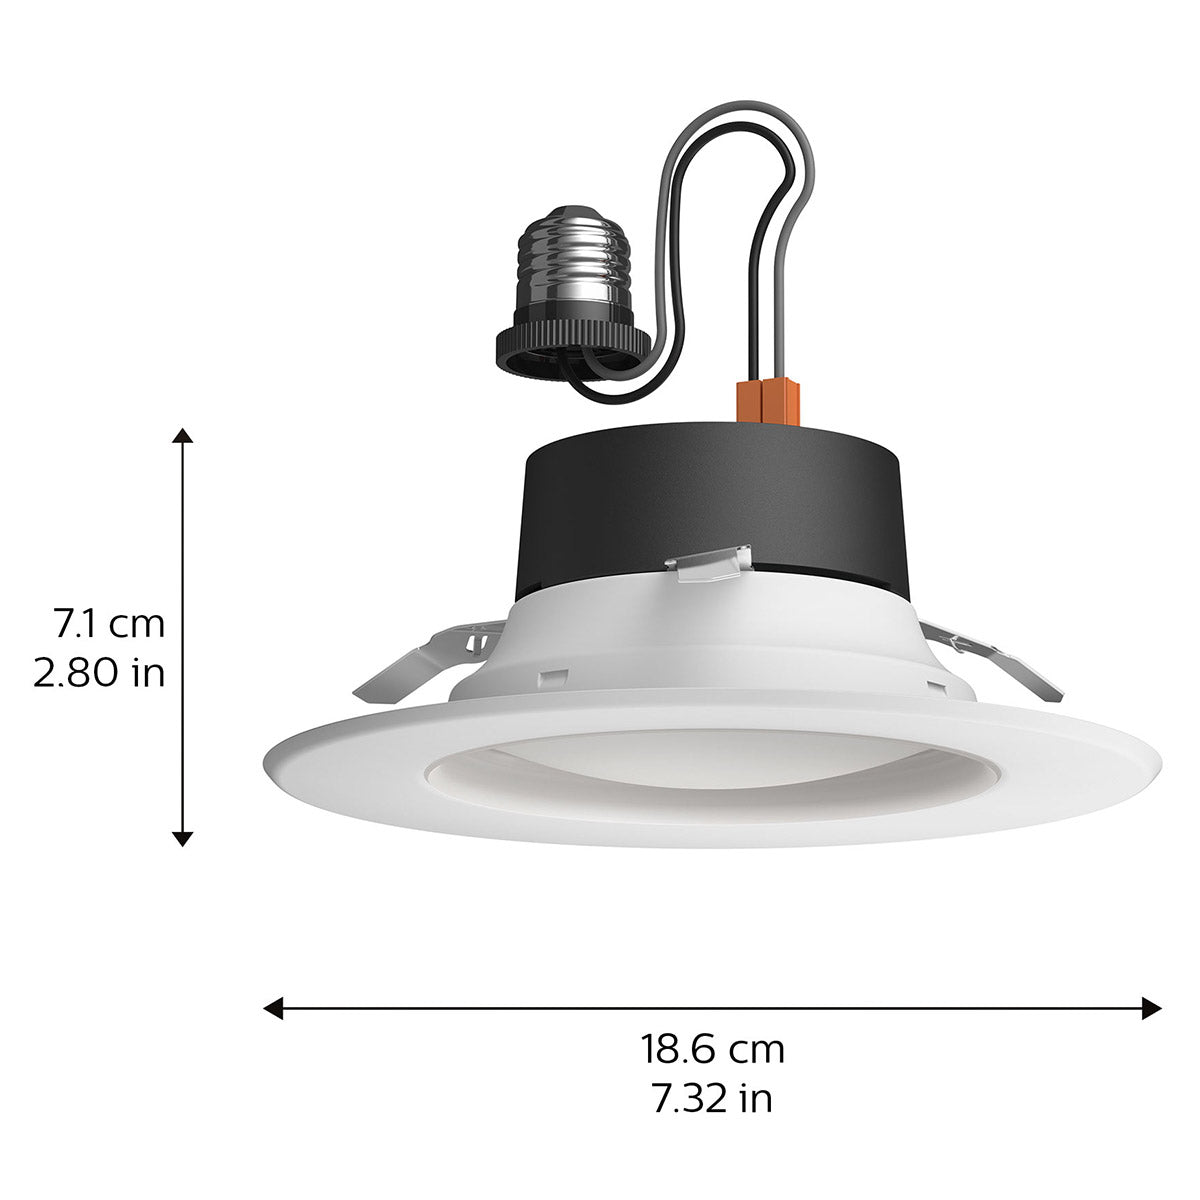 Hue White and Color Ambiance Recessed Downlight 5" to 6" 3-Pack